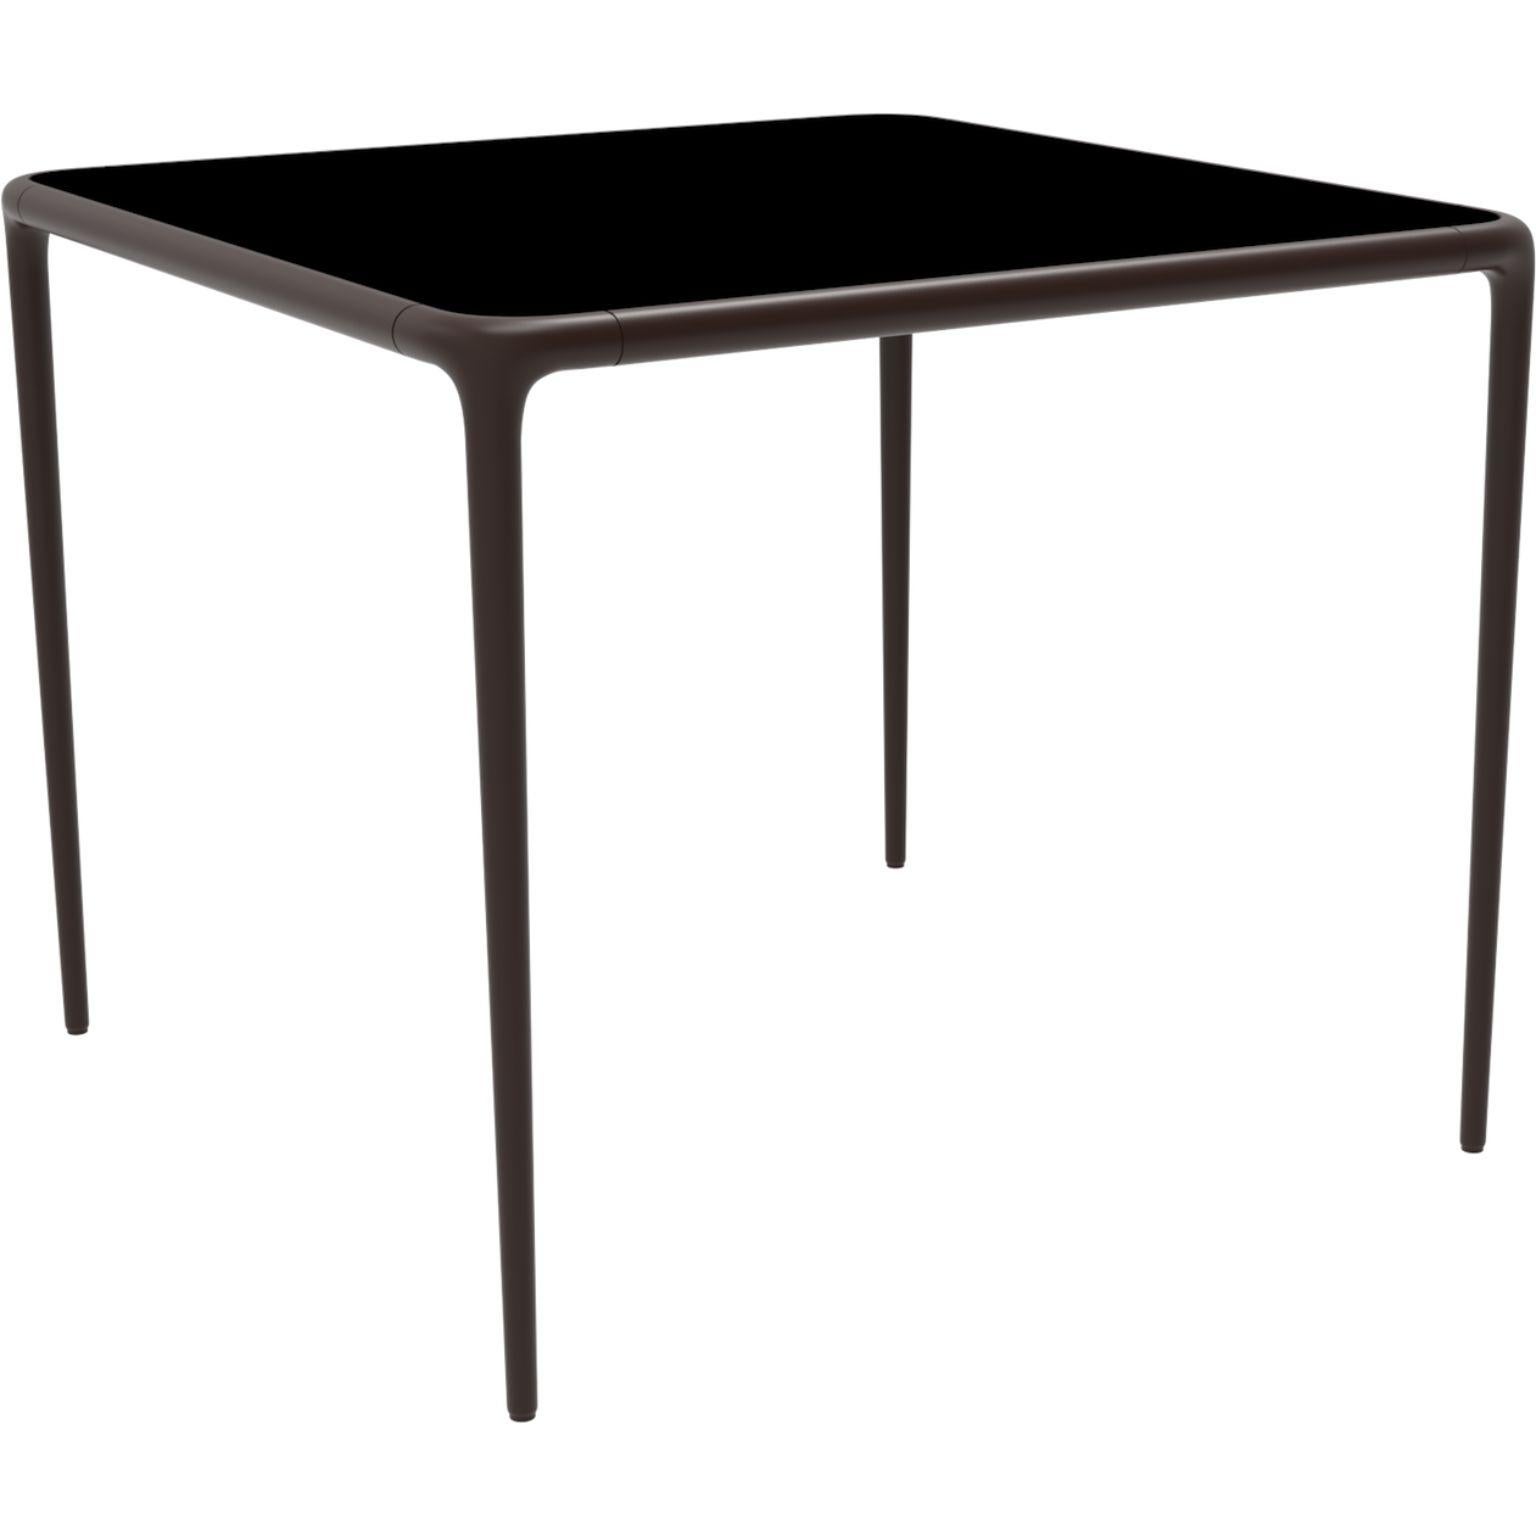 Xaloc chocolate glass top table 90 by MOWEE
Dimensions: D90 x W90 x H74 cm
Material: Aluminum, tinted tempered glass top.
Also available in different aluminum colors and finishes (HPL Black Edge or Neolith). 

 Xaloc synthesizes the lines of